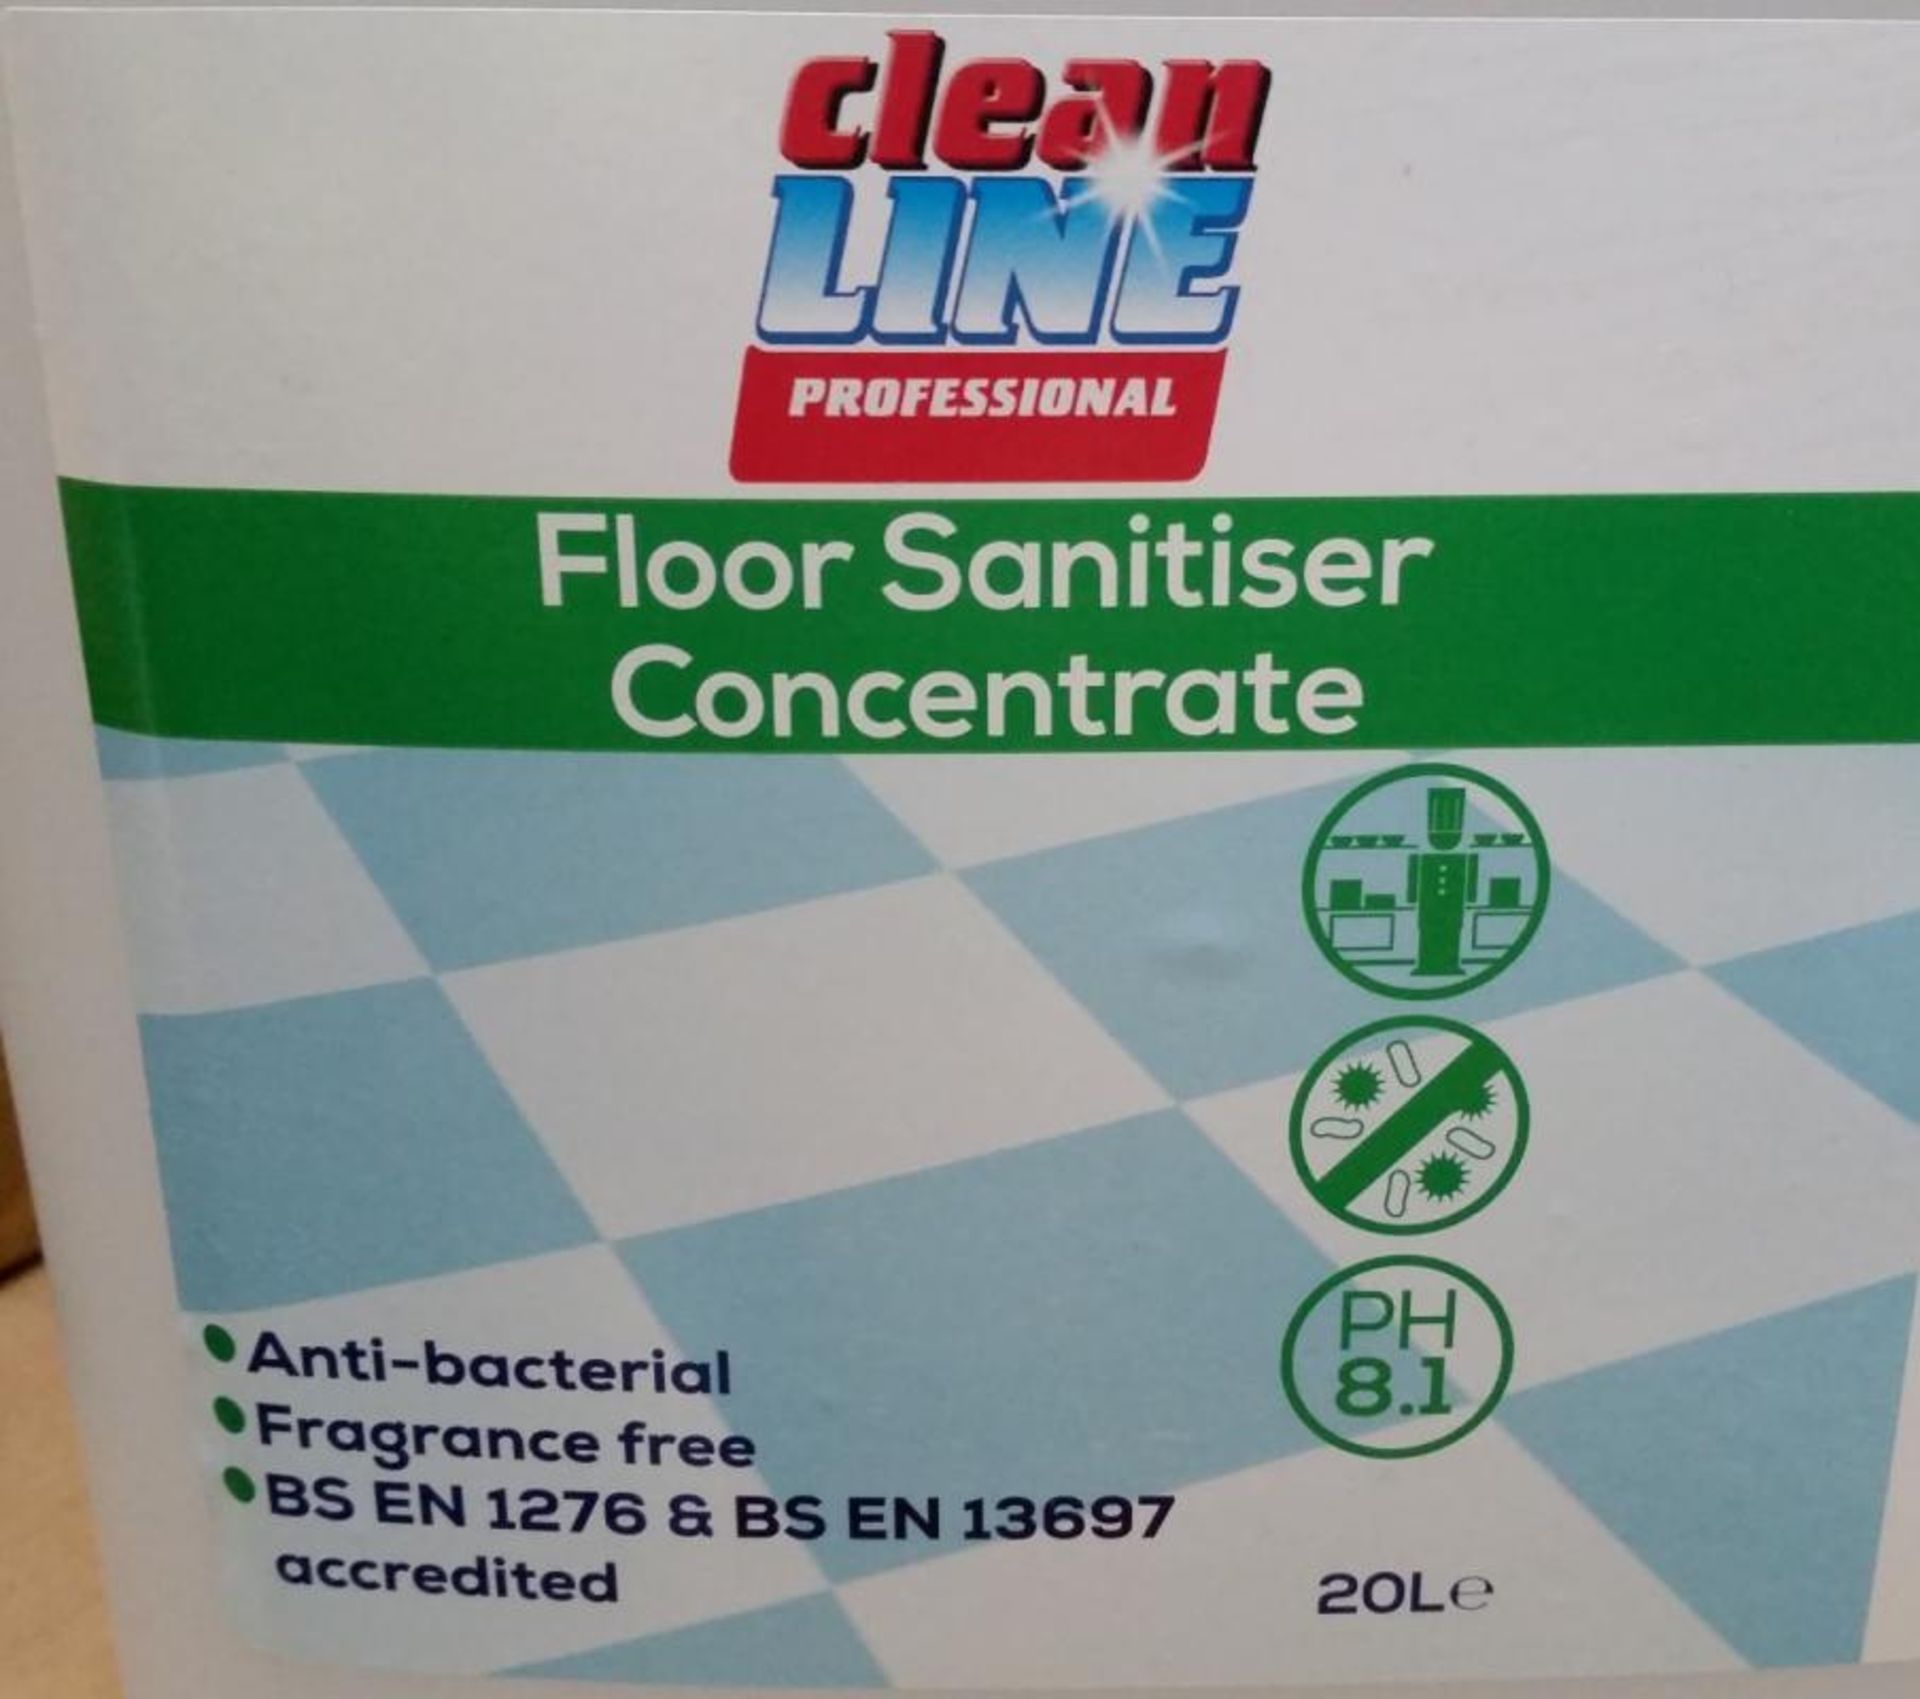 1 x Clean Line Professional 20 Litre Floor Sanitiser Concentrate - Anti Bacterial and Fragrant - Image 5 of 5